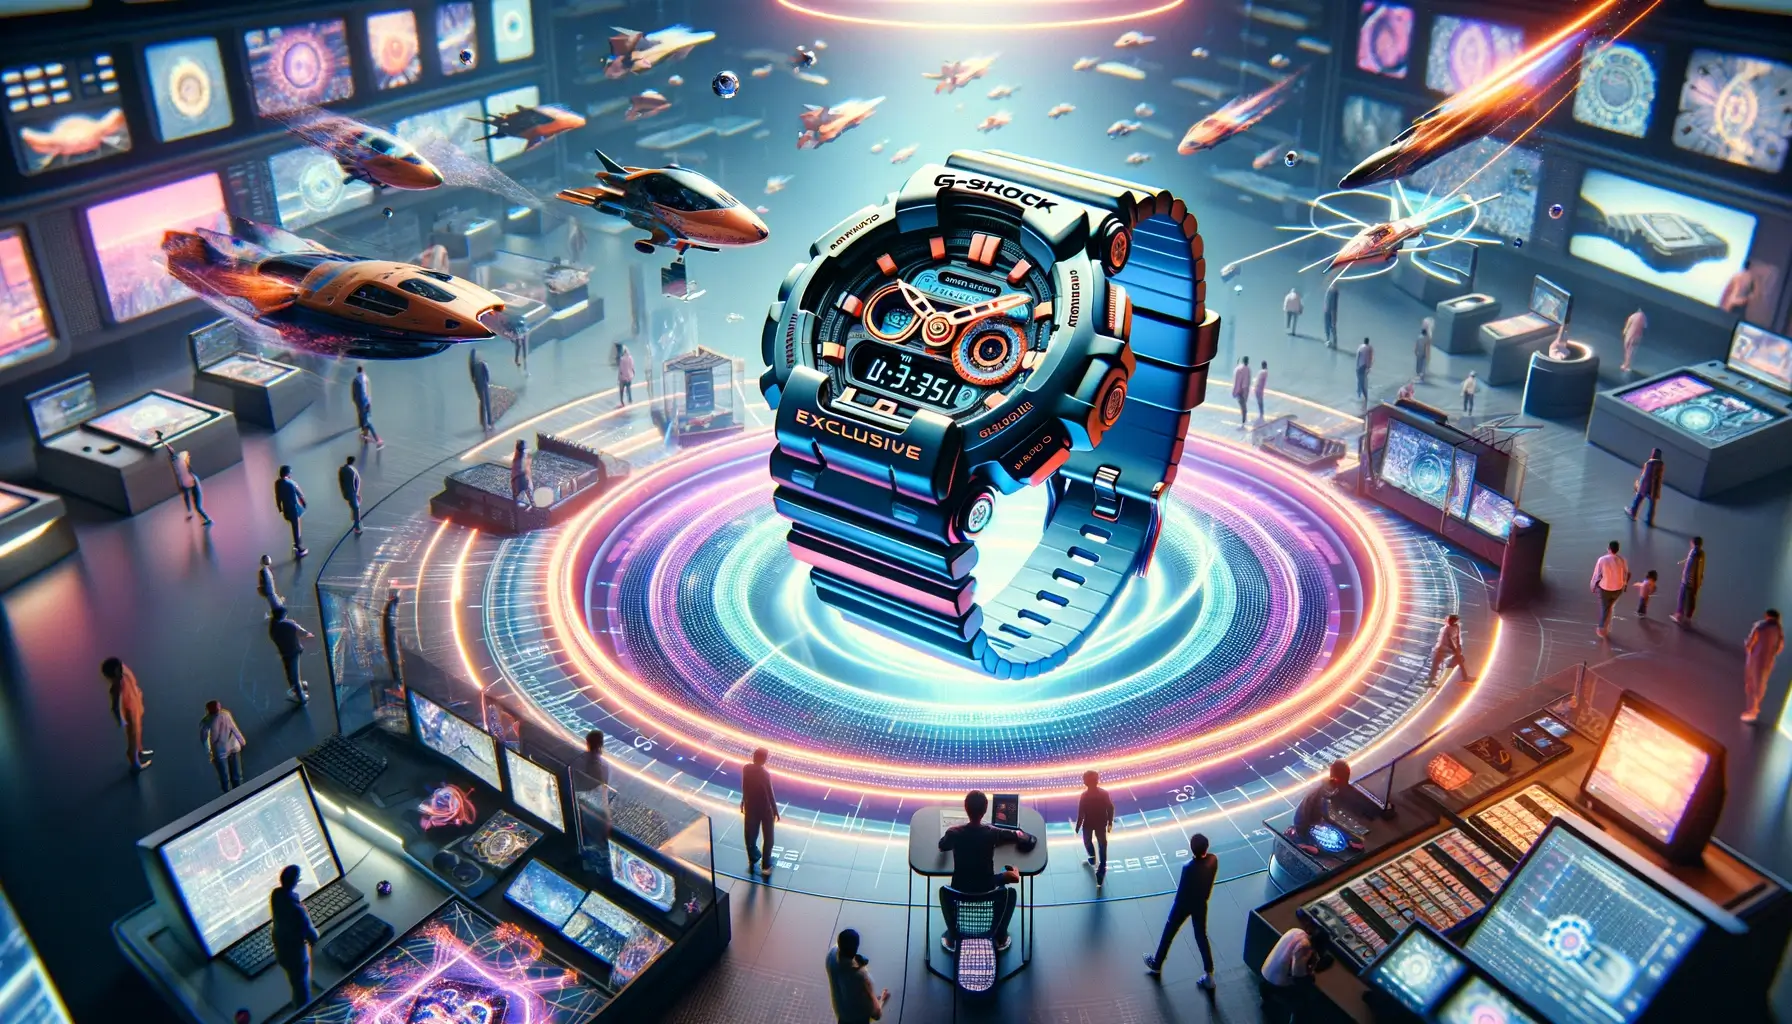 G-Shock Goes Digital. Casio’s Metaverse Debut with Exclusive NFTs